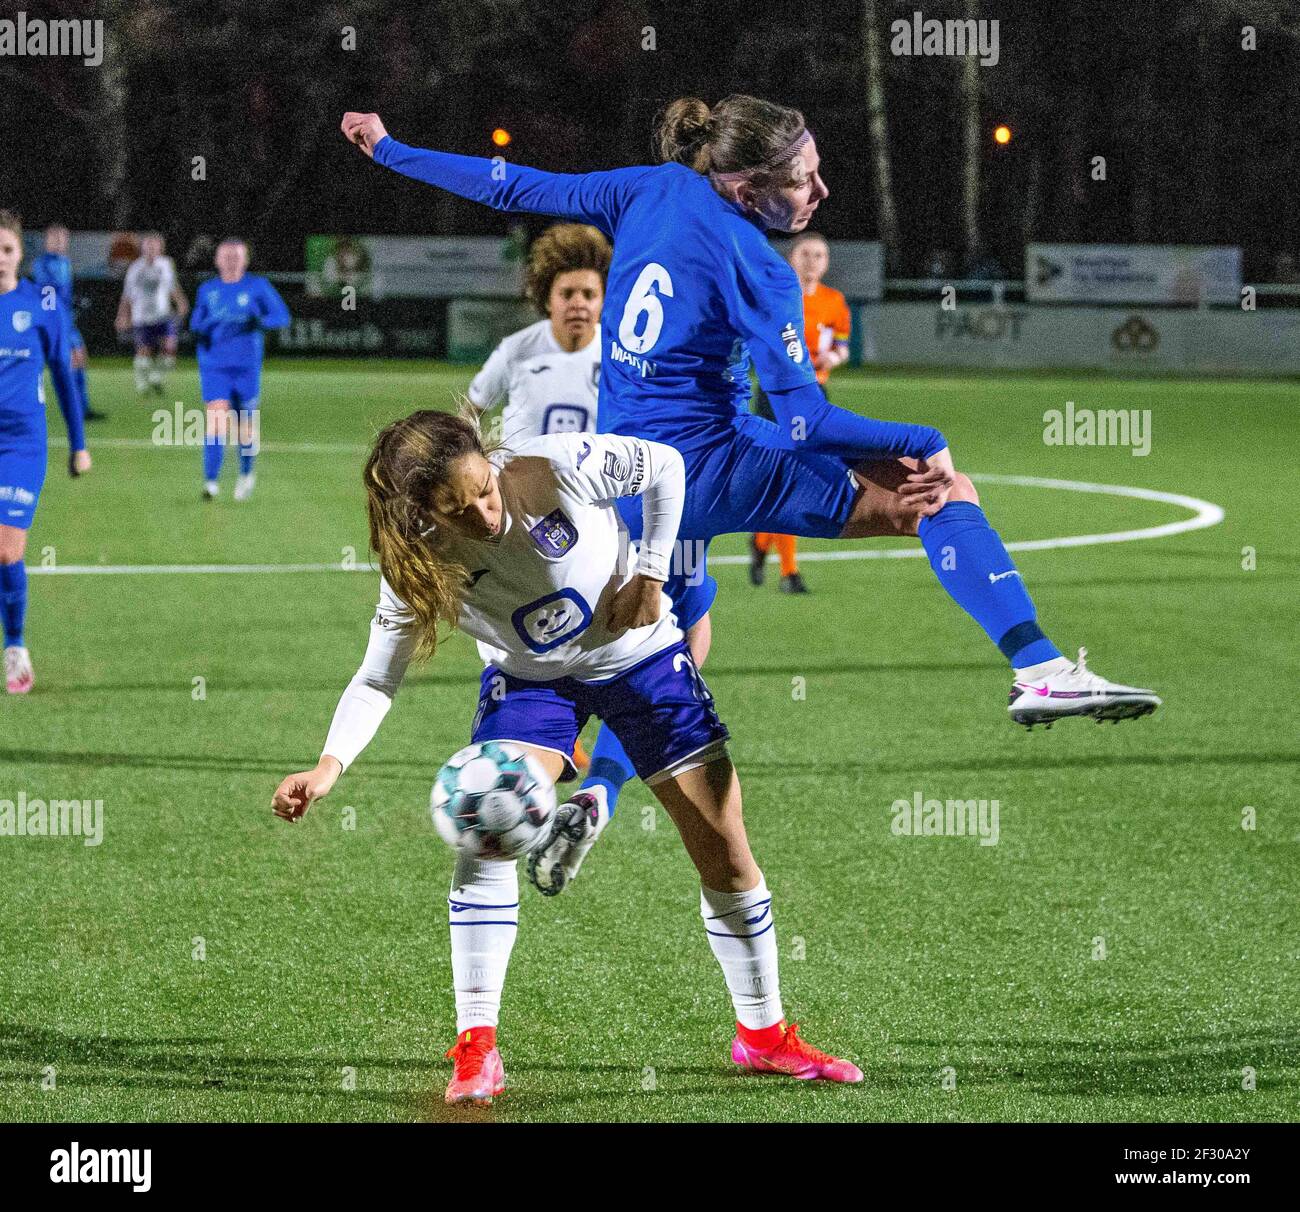 midfielder Lorene Martin (6) of KRC Genk pictured in a duel with ...